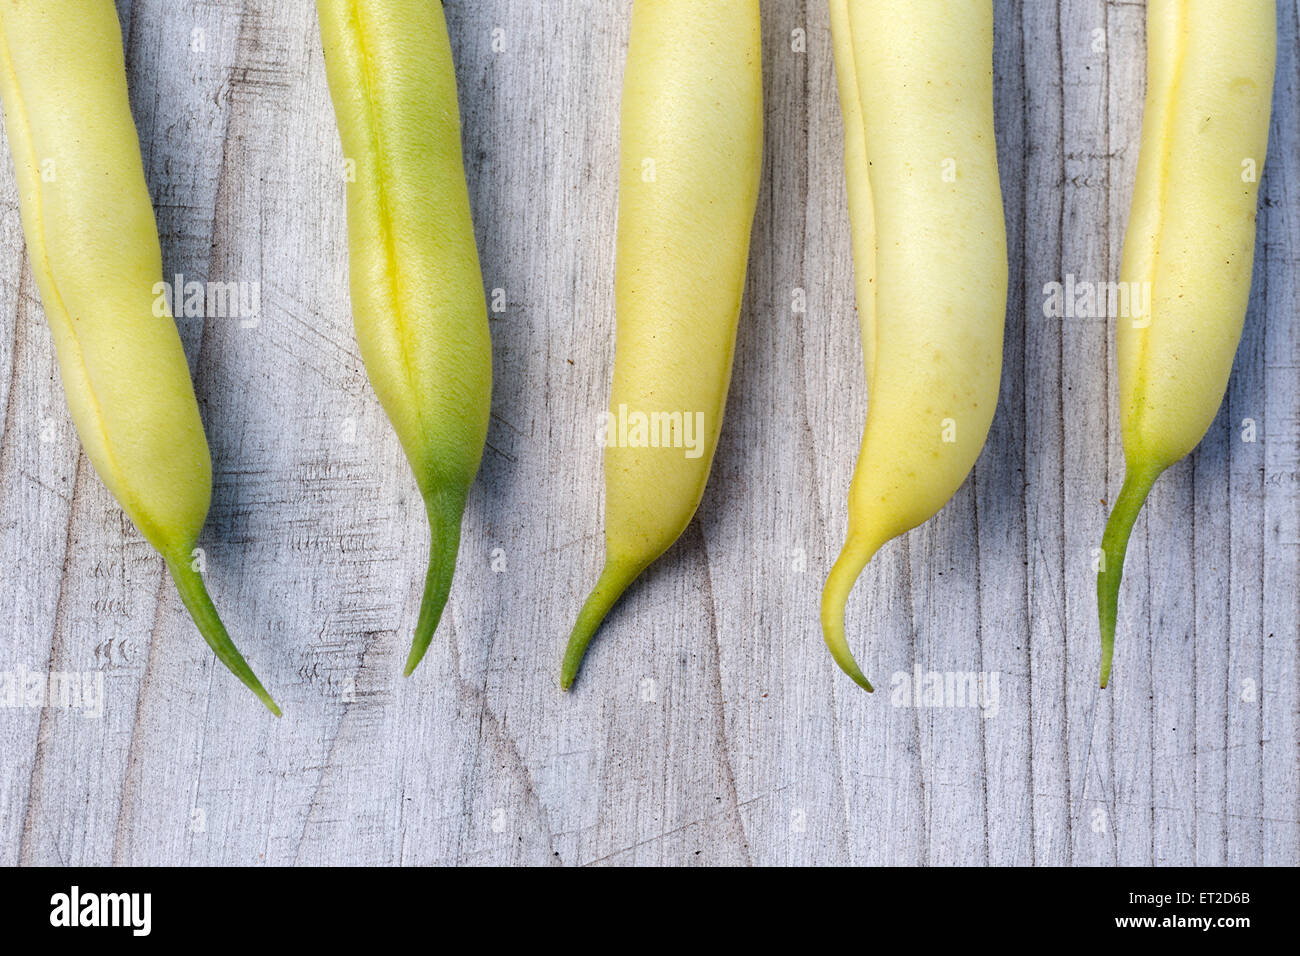 Freshly picked yellow beans from the garden. Stock Photo